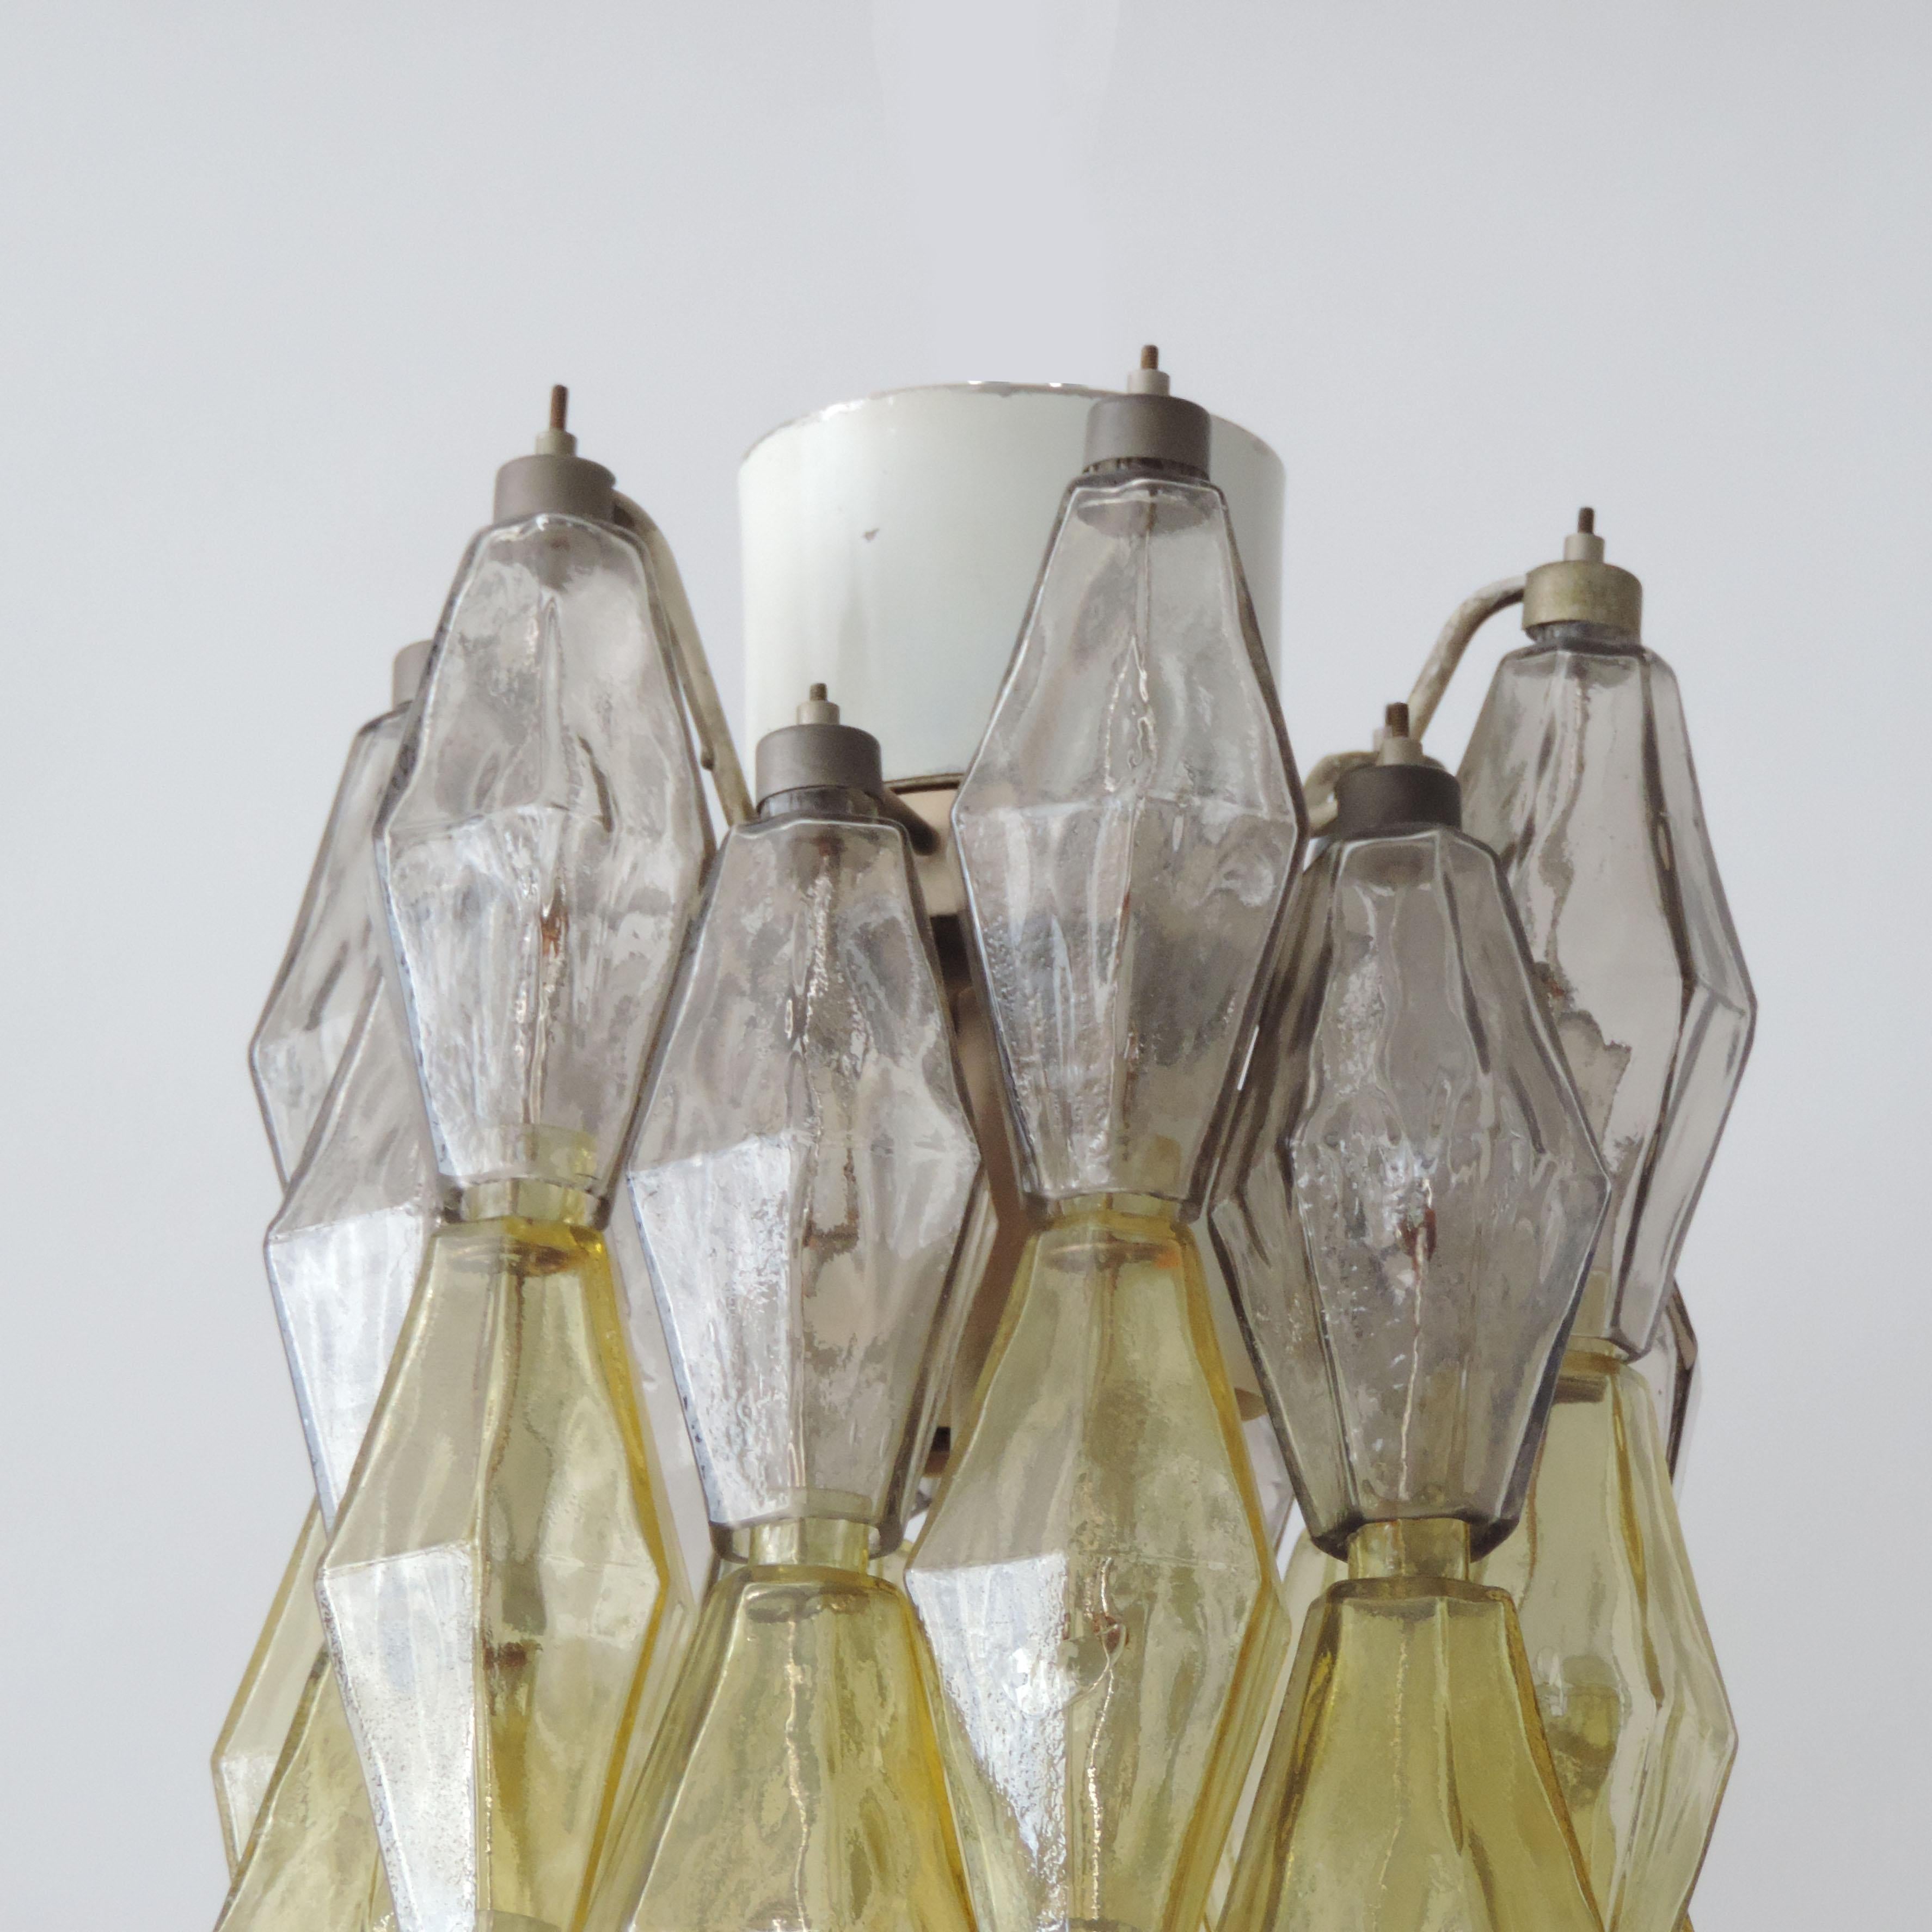 Mid-20th Century Carlo Scarpa Poliedri Ceiling Lamp for Venini in Yellow and Grey, Italy 1950s For Sale